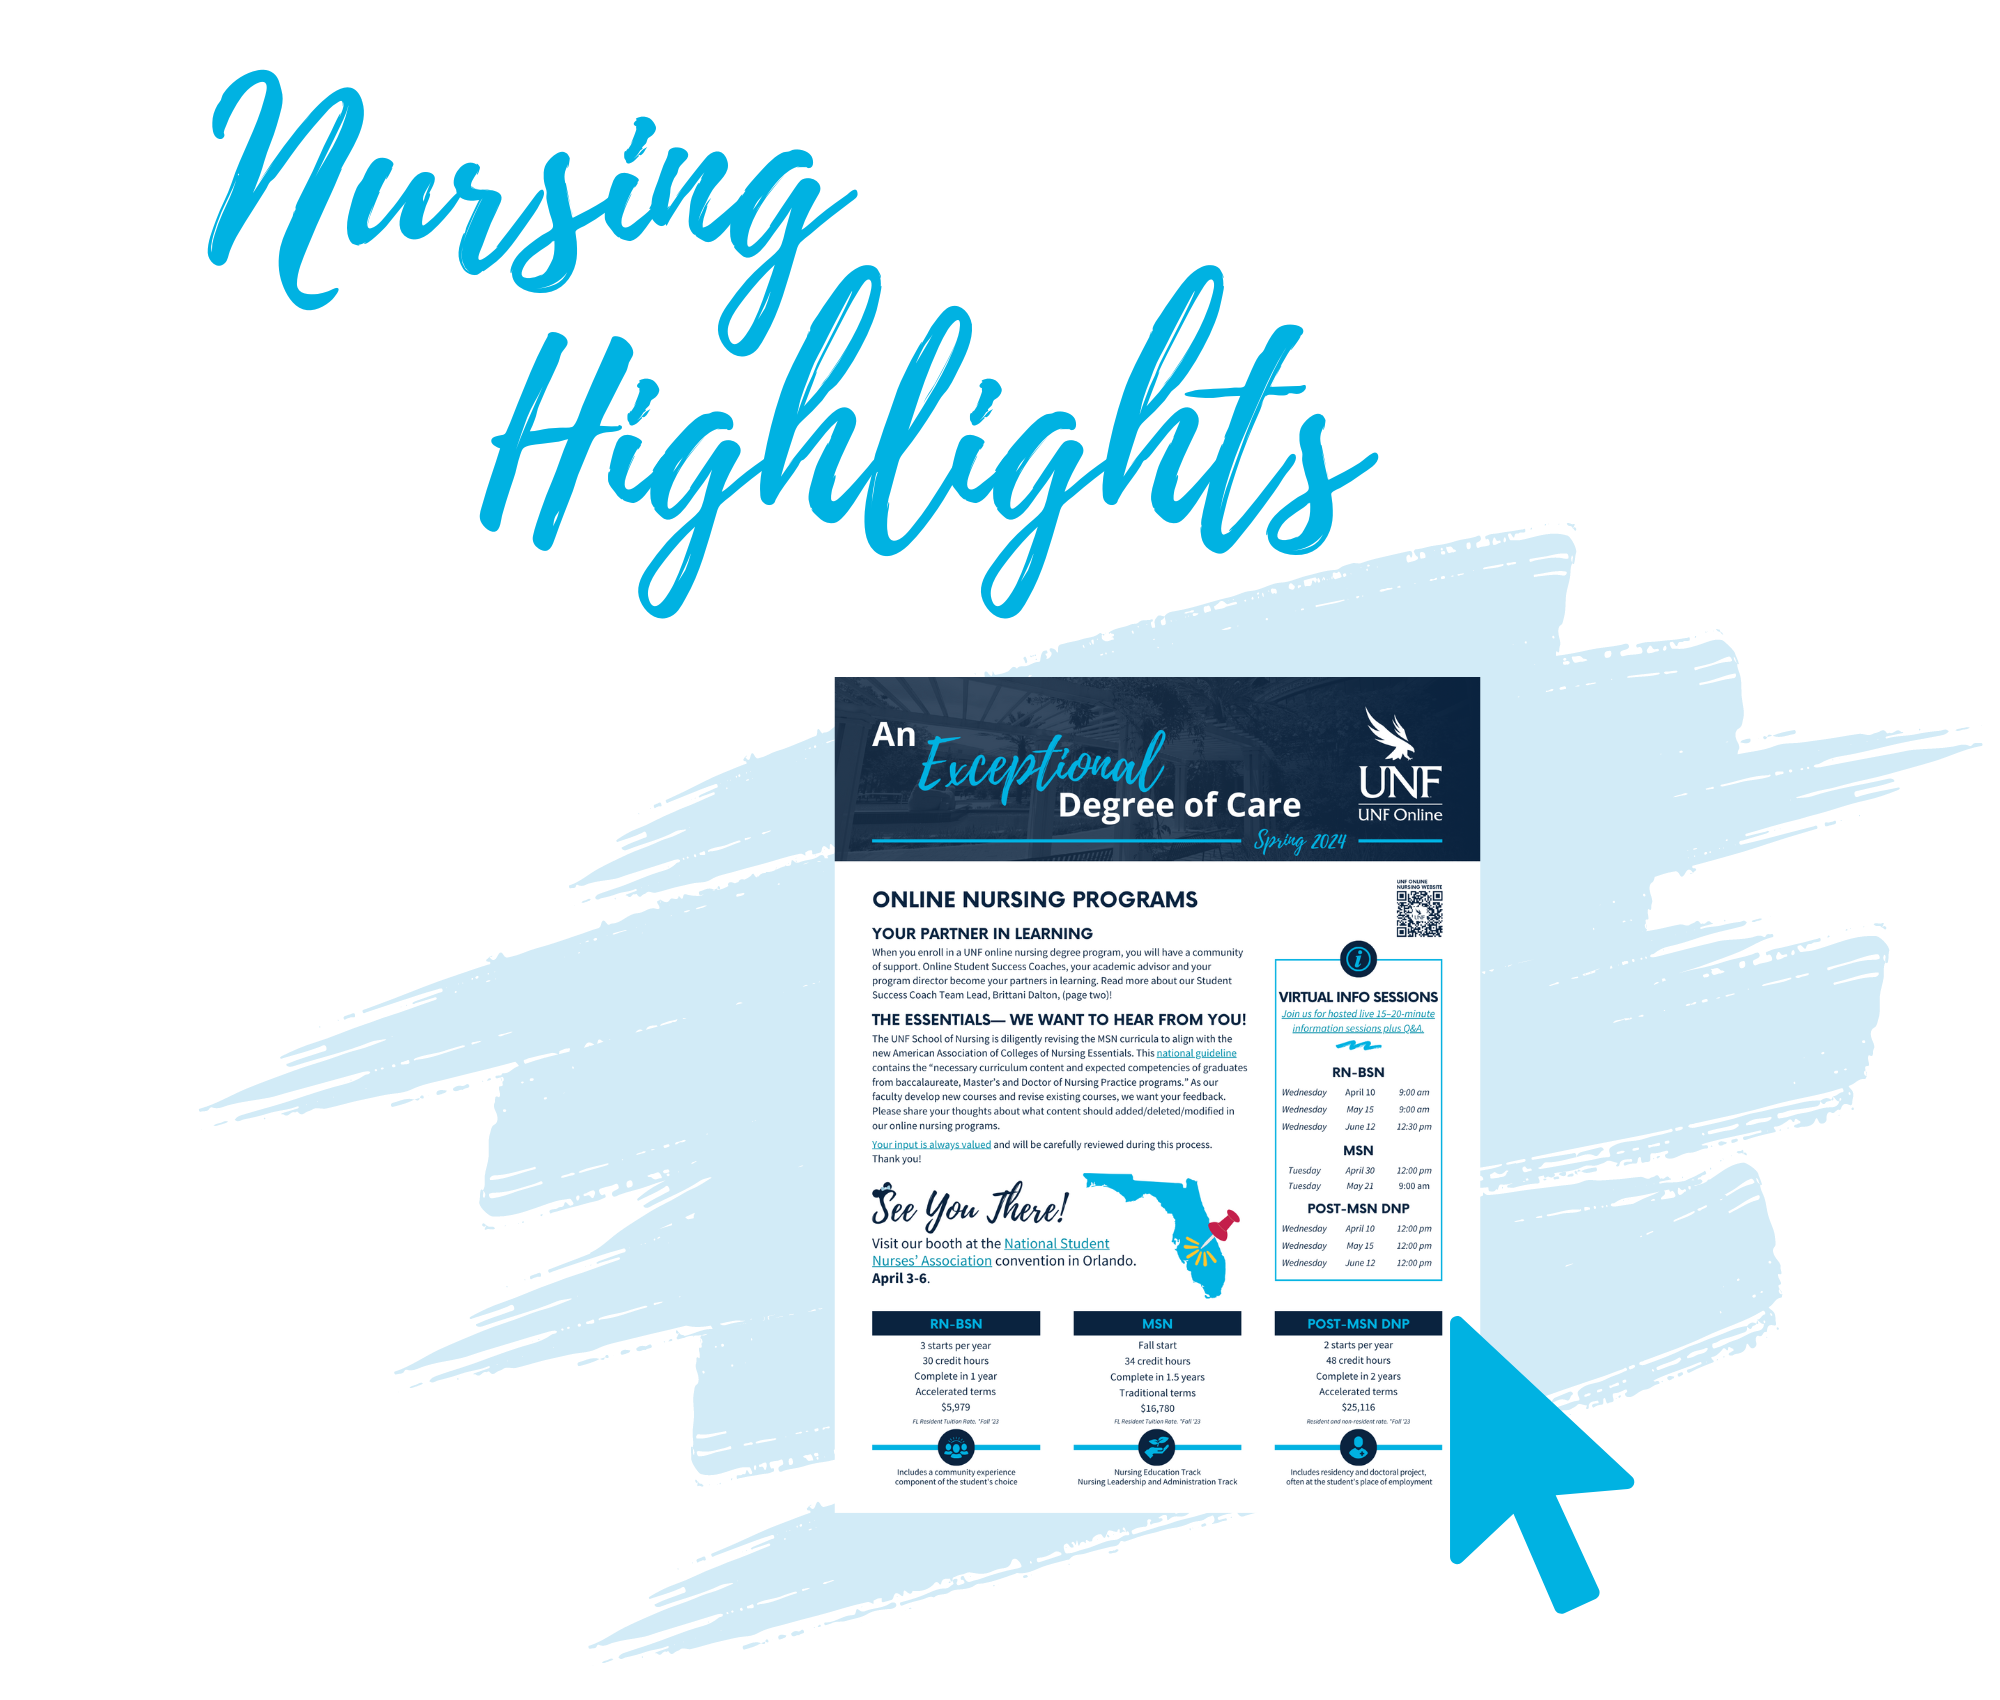 Nursing Highlights text by a newsletter mockup